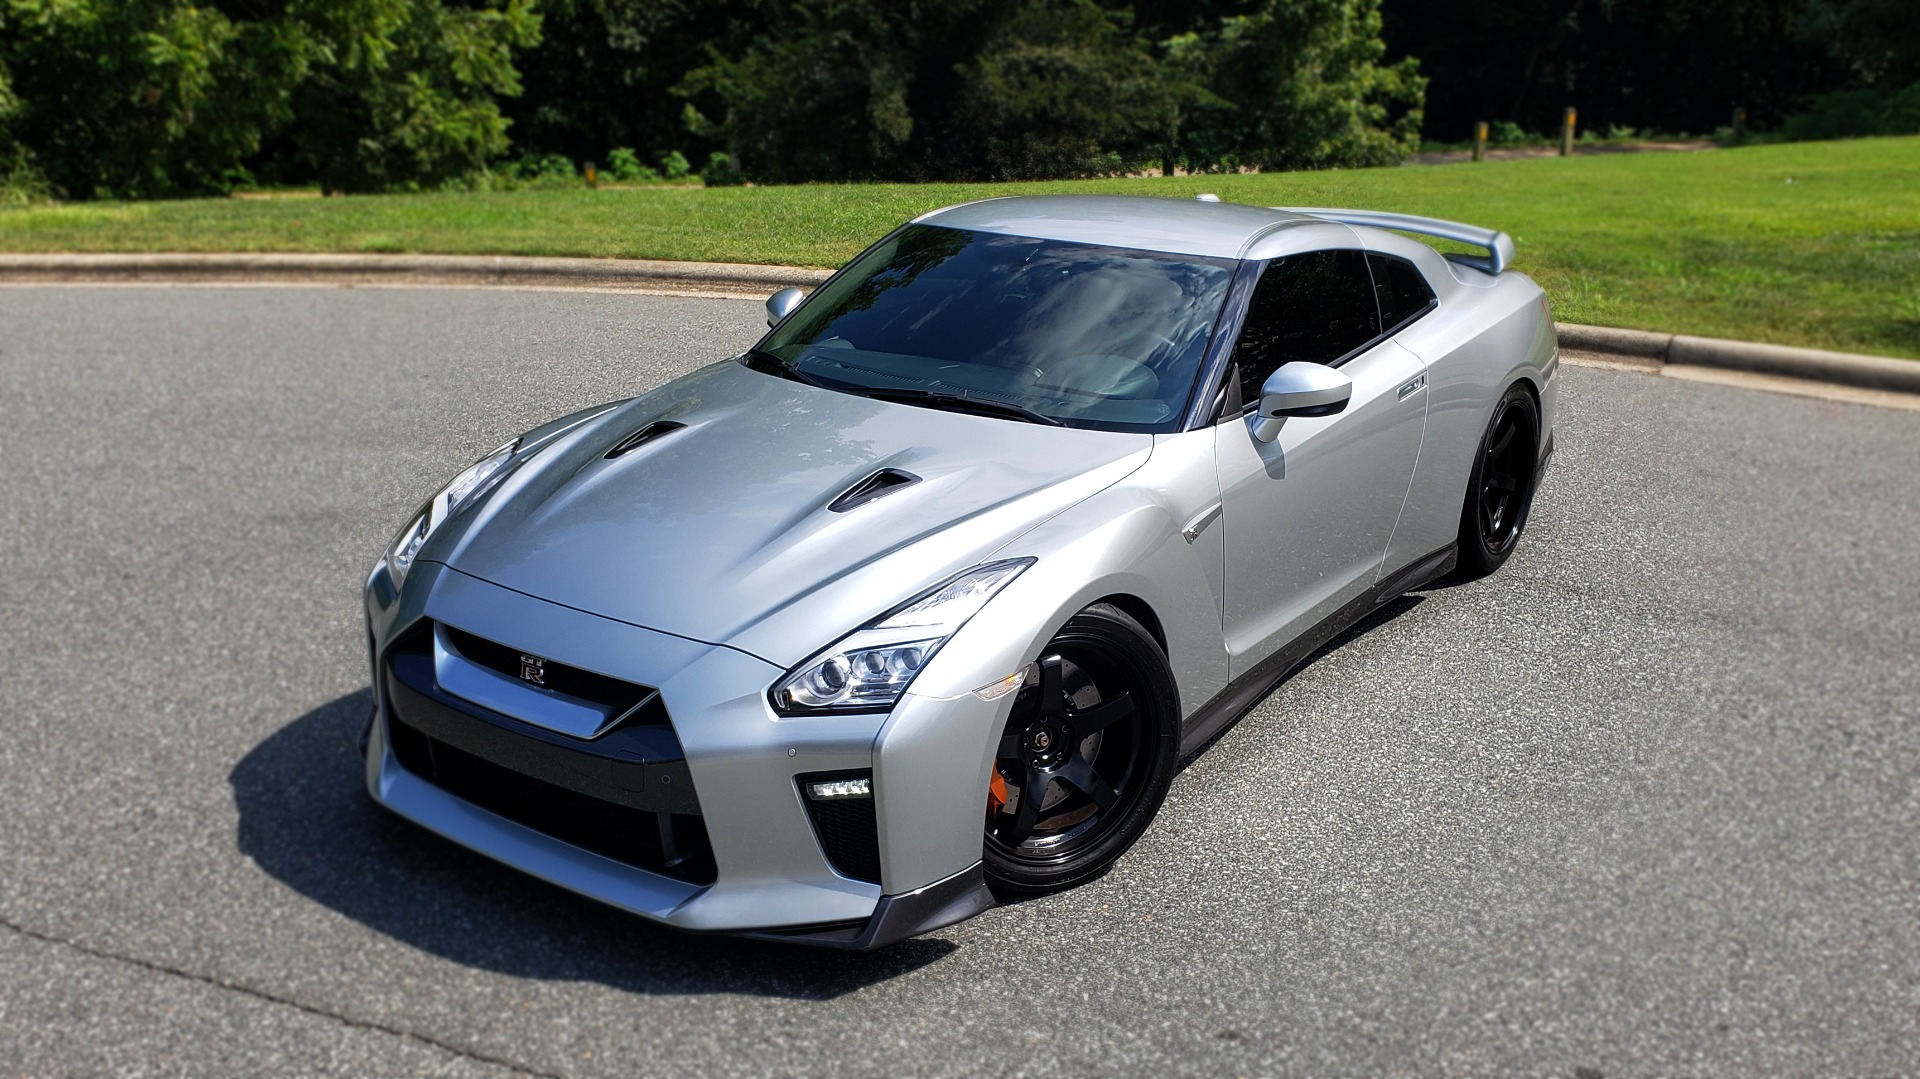 Used 2018 Nissan GT-R PREMIUM / NAV / BOSE / REARVIEW / CUSTOM WHEELS / COIL OVER SHOCKS / TUNED for sale Sold at Formula Imports in Charlotte NC 28227 5